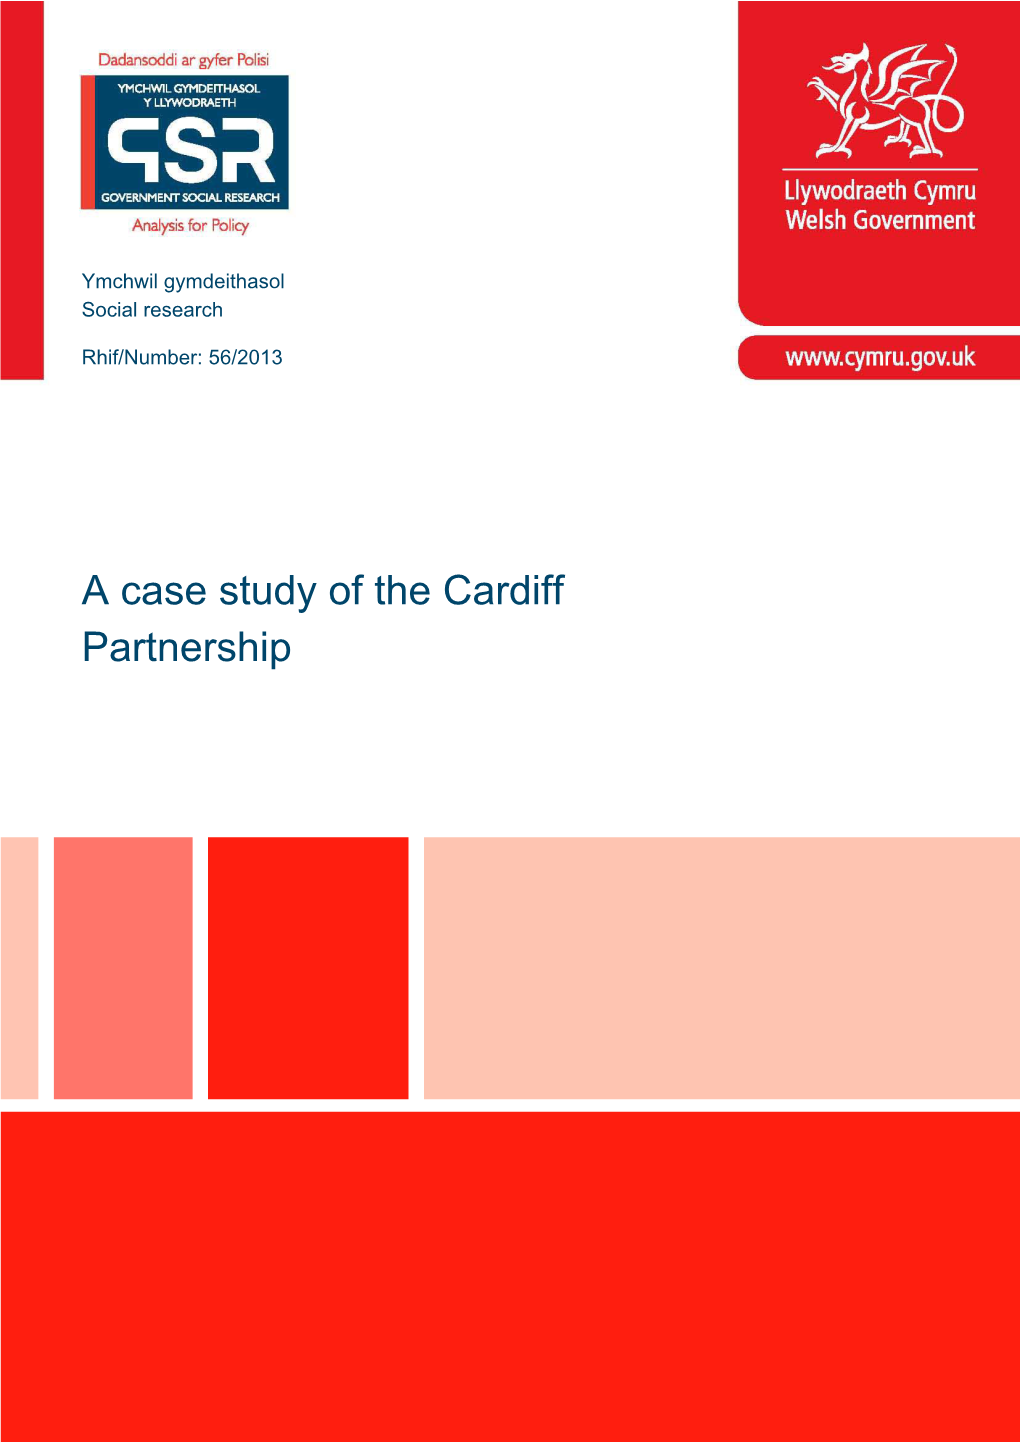 A Case Study of the Cardiff Partnership